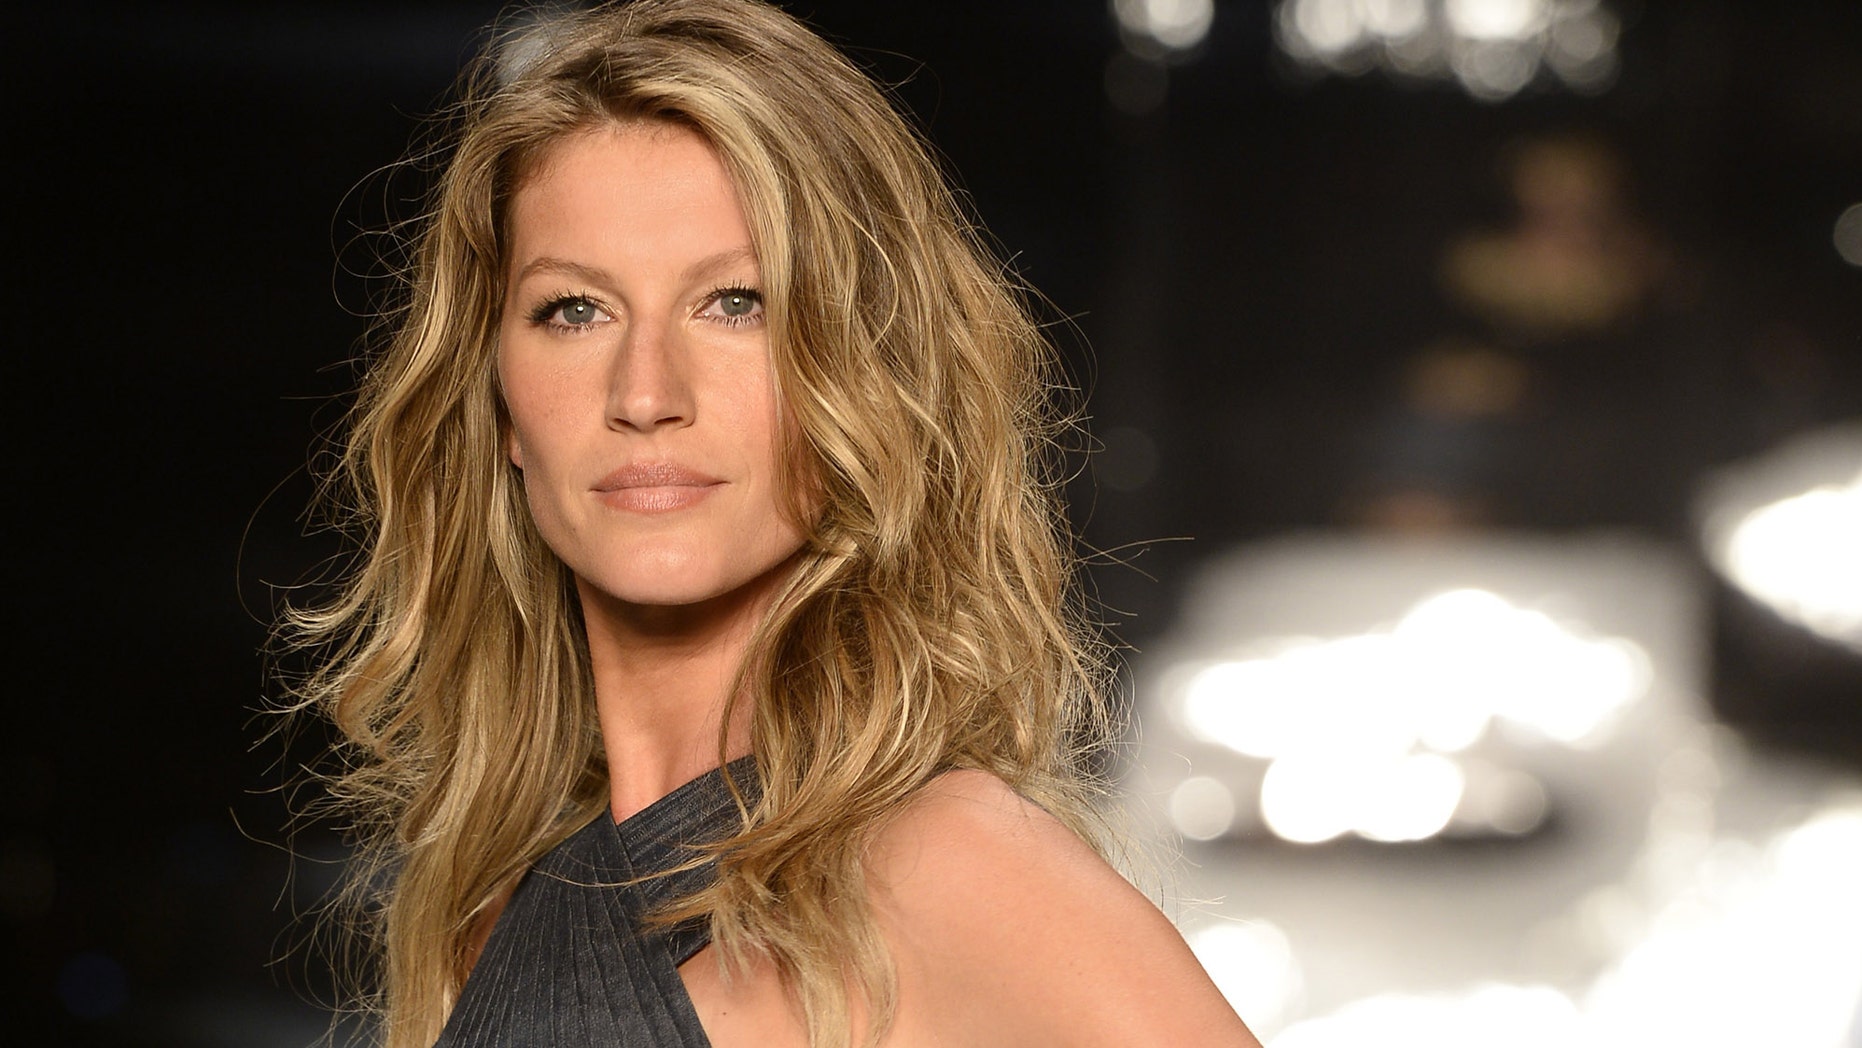 Supermodel Gisele Bundchen revealed she once contemplated suicide in a new interview with Access. 